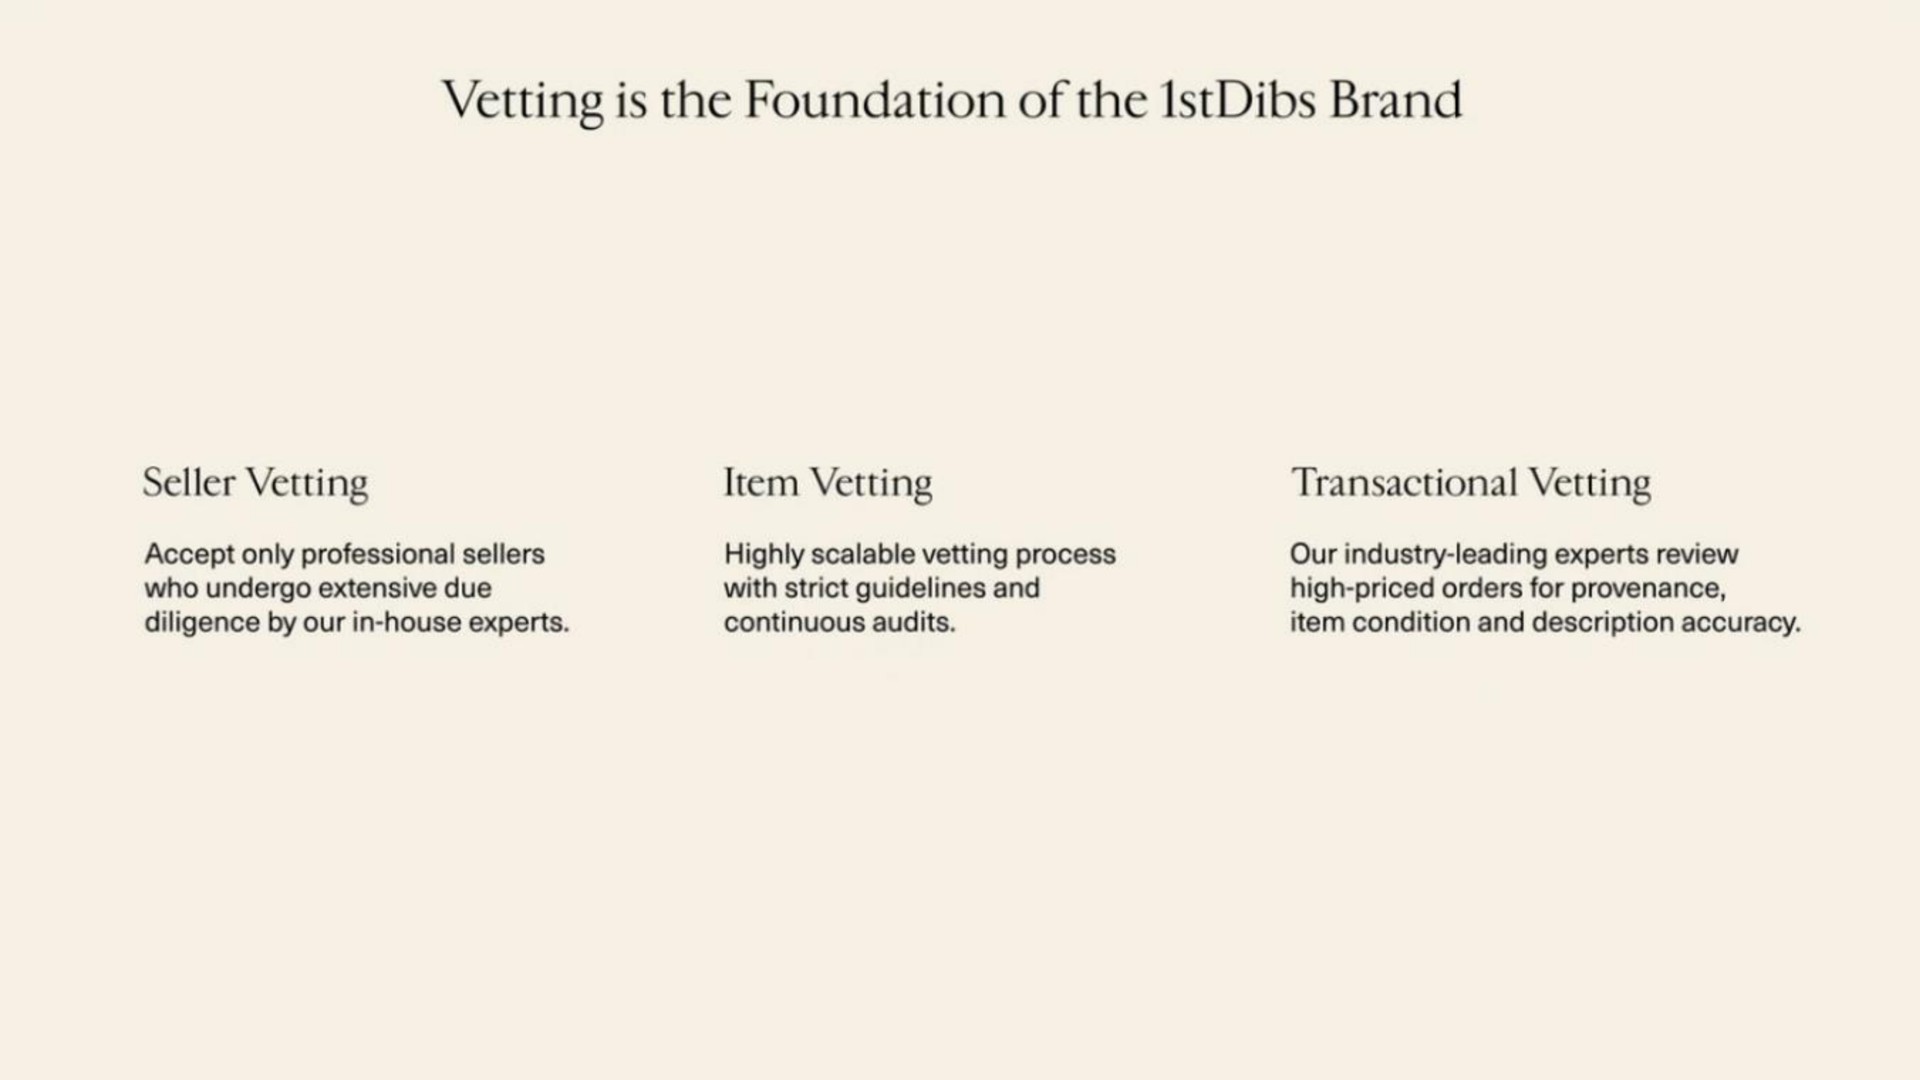 vetting is the foundation of the brand seller vetting item vetting transactional vetting | 1stDibs